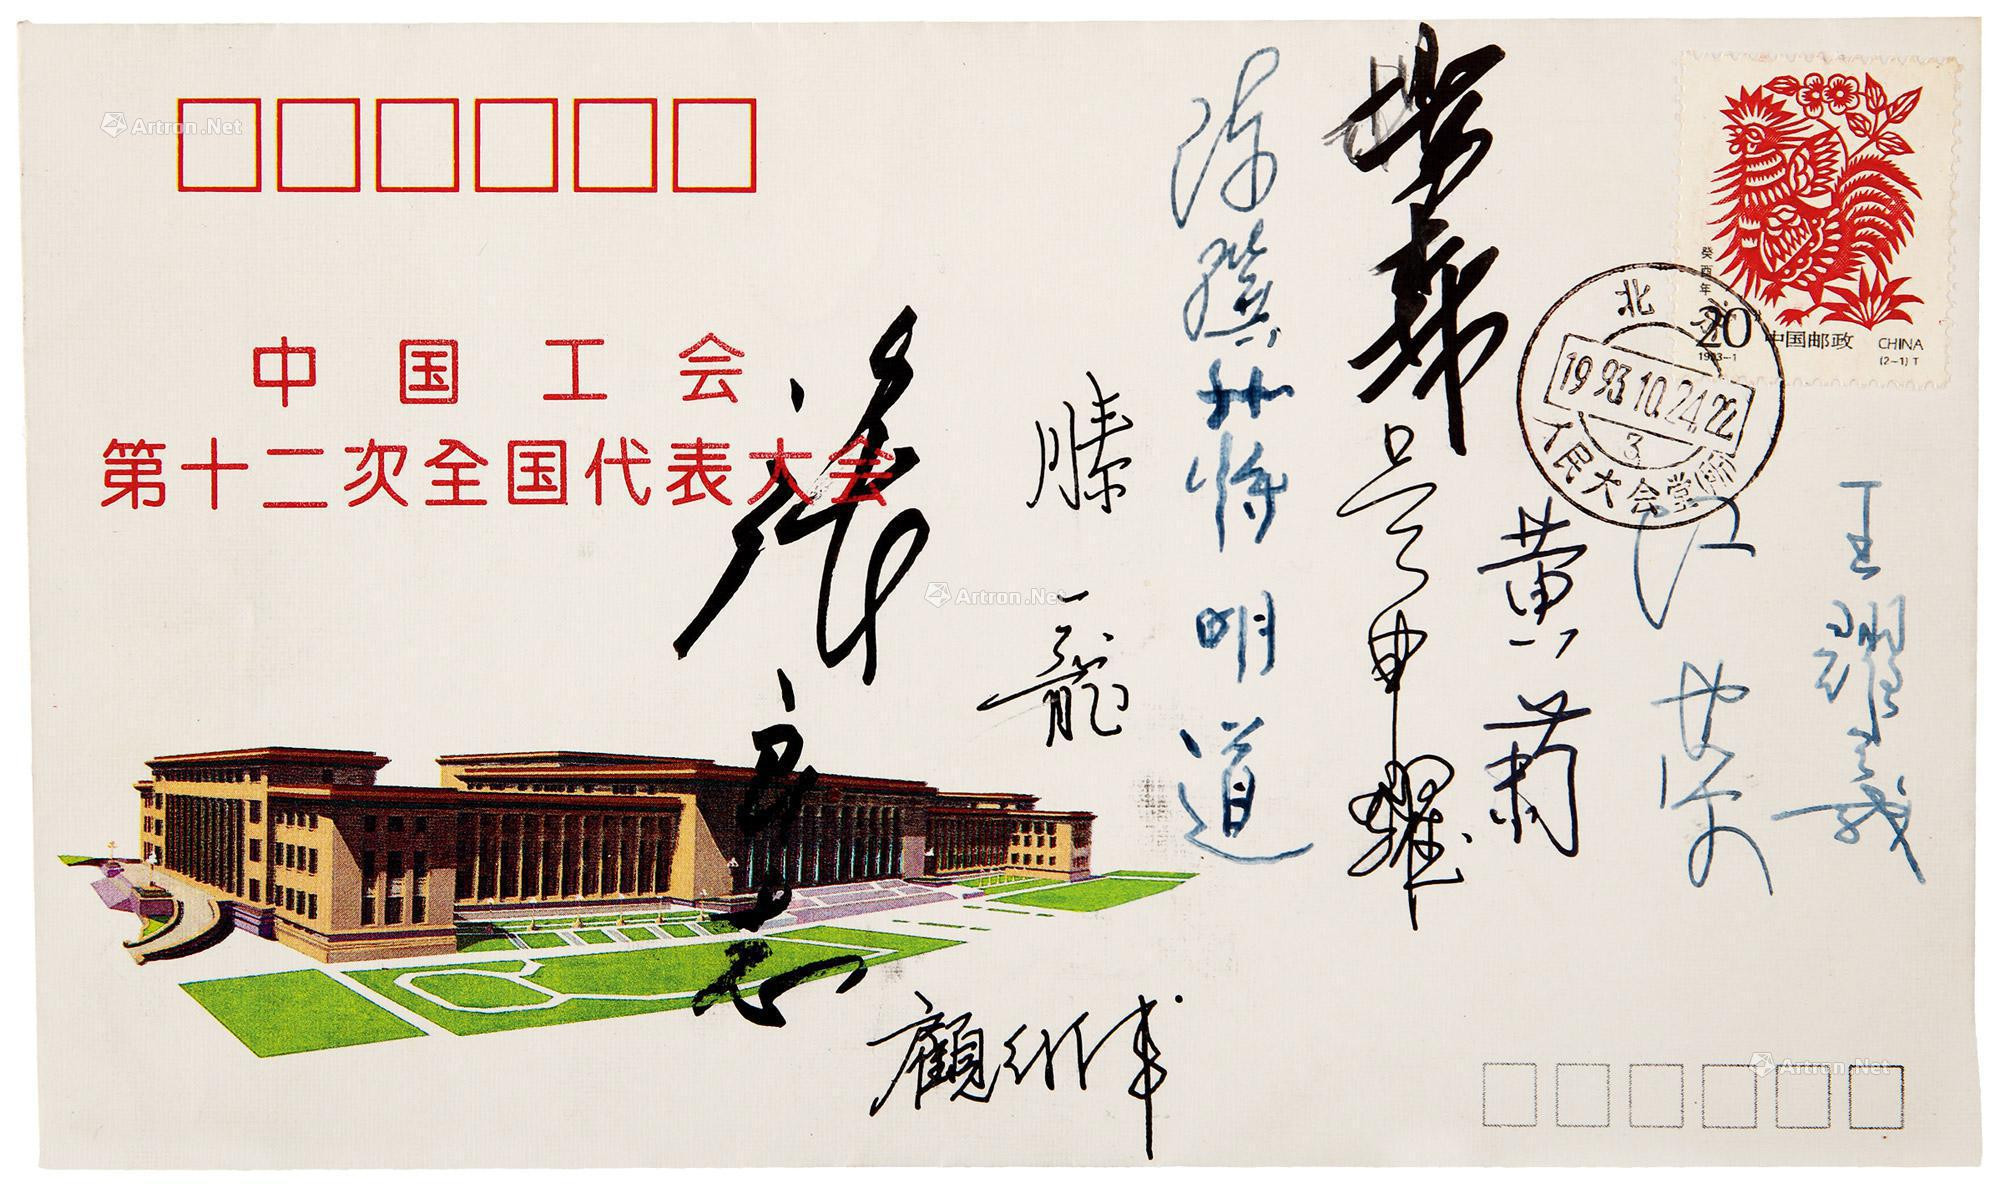 One souvenir cover signed by the 12th National Congress of the Chinese Trade Union